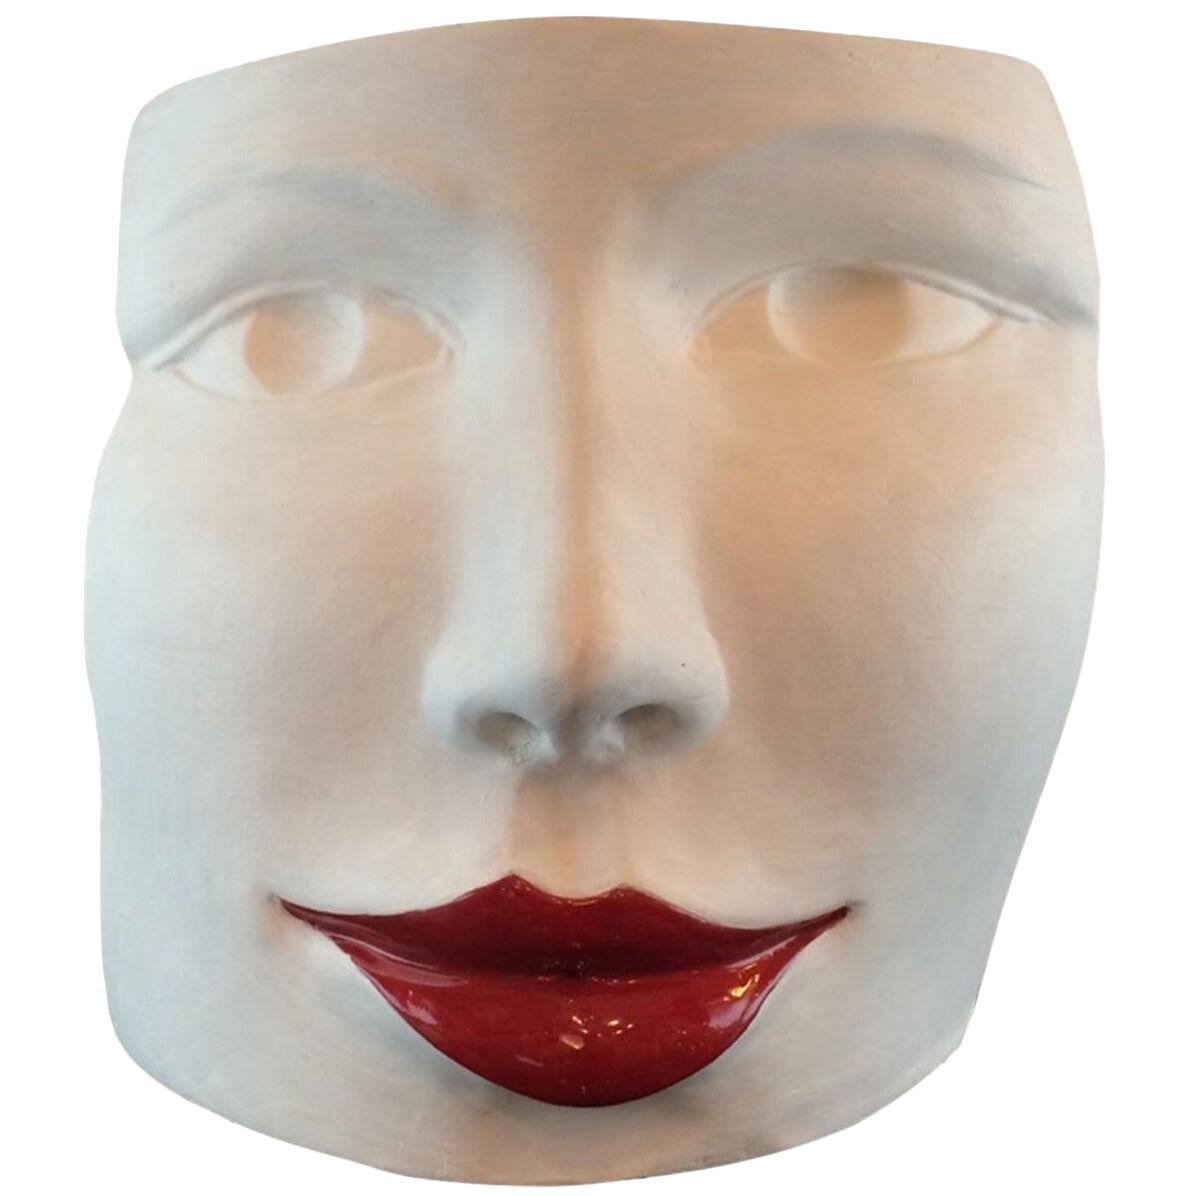 "Red Lips Face," Terra Cotta Sculpture by Ginestroni